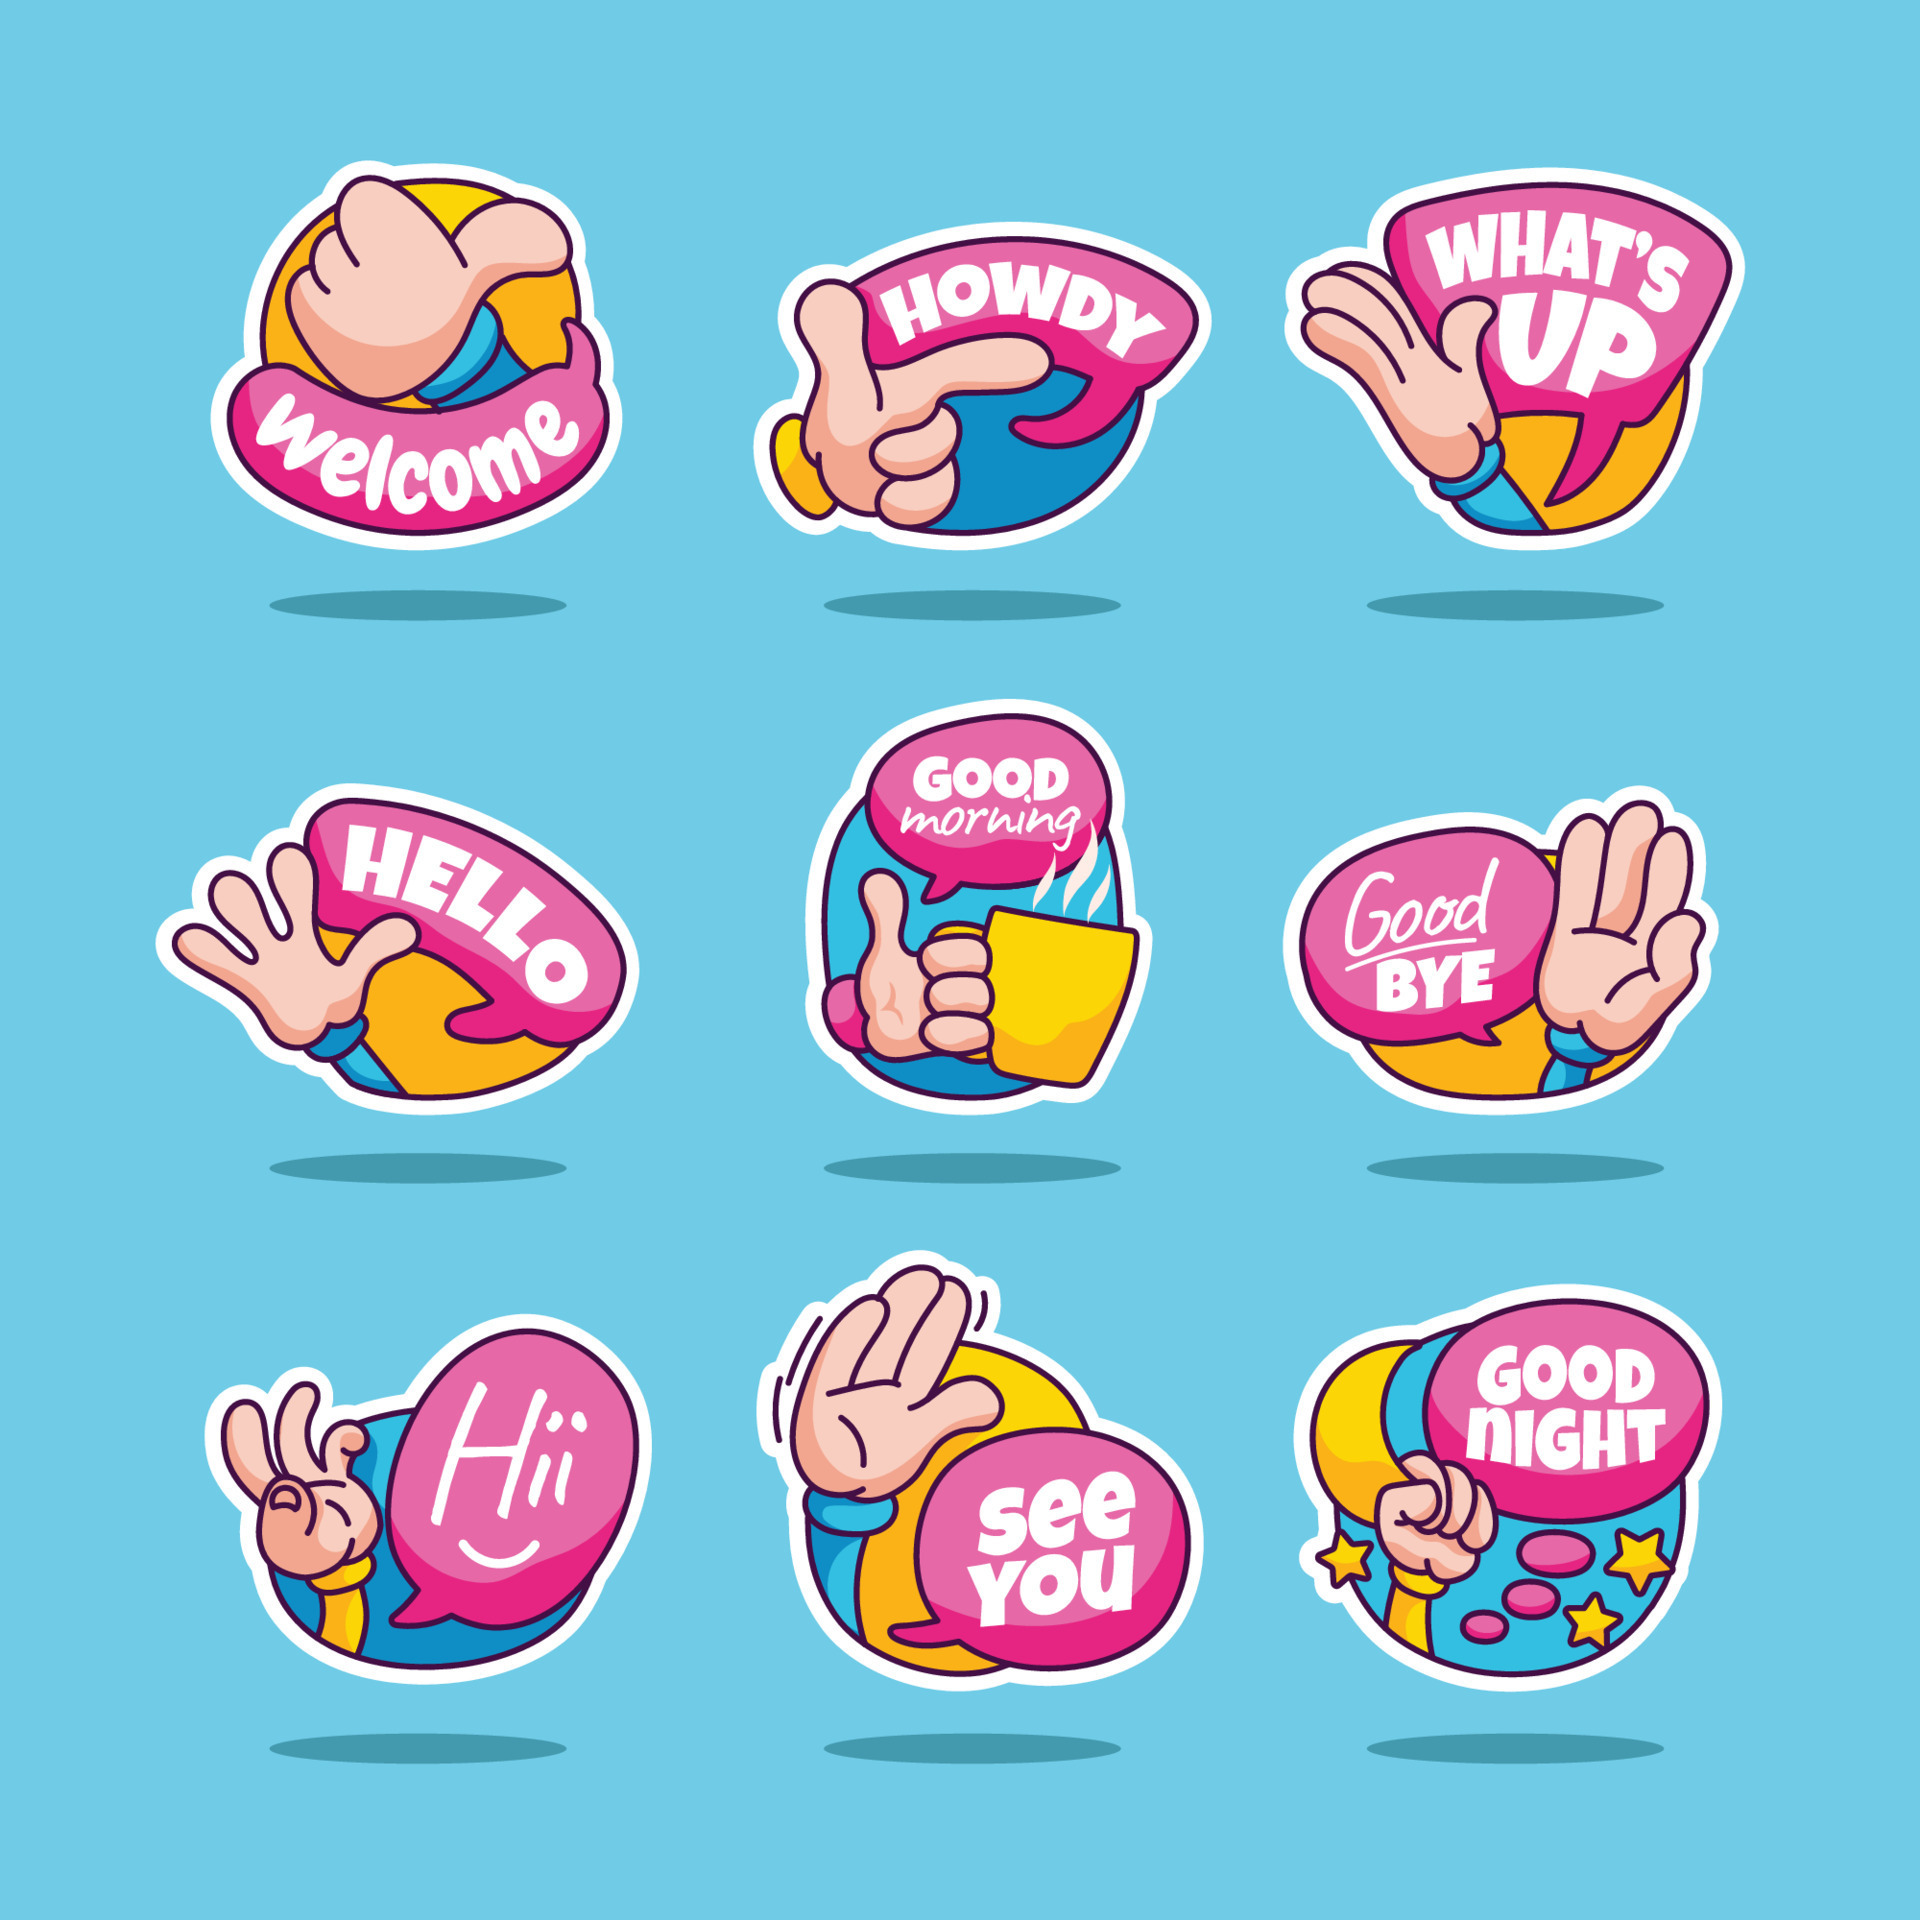 https://static.vecteezy.com/system/resources/previews/014/759/740/original/greeting-chat-sticker-collection-template-free-vector.jpg